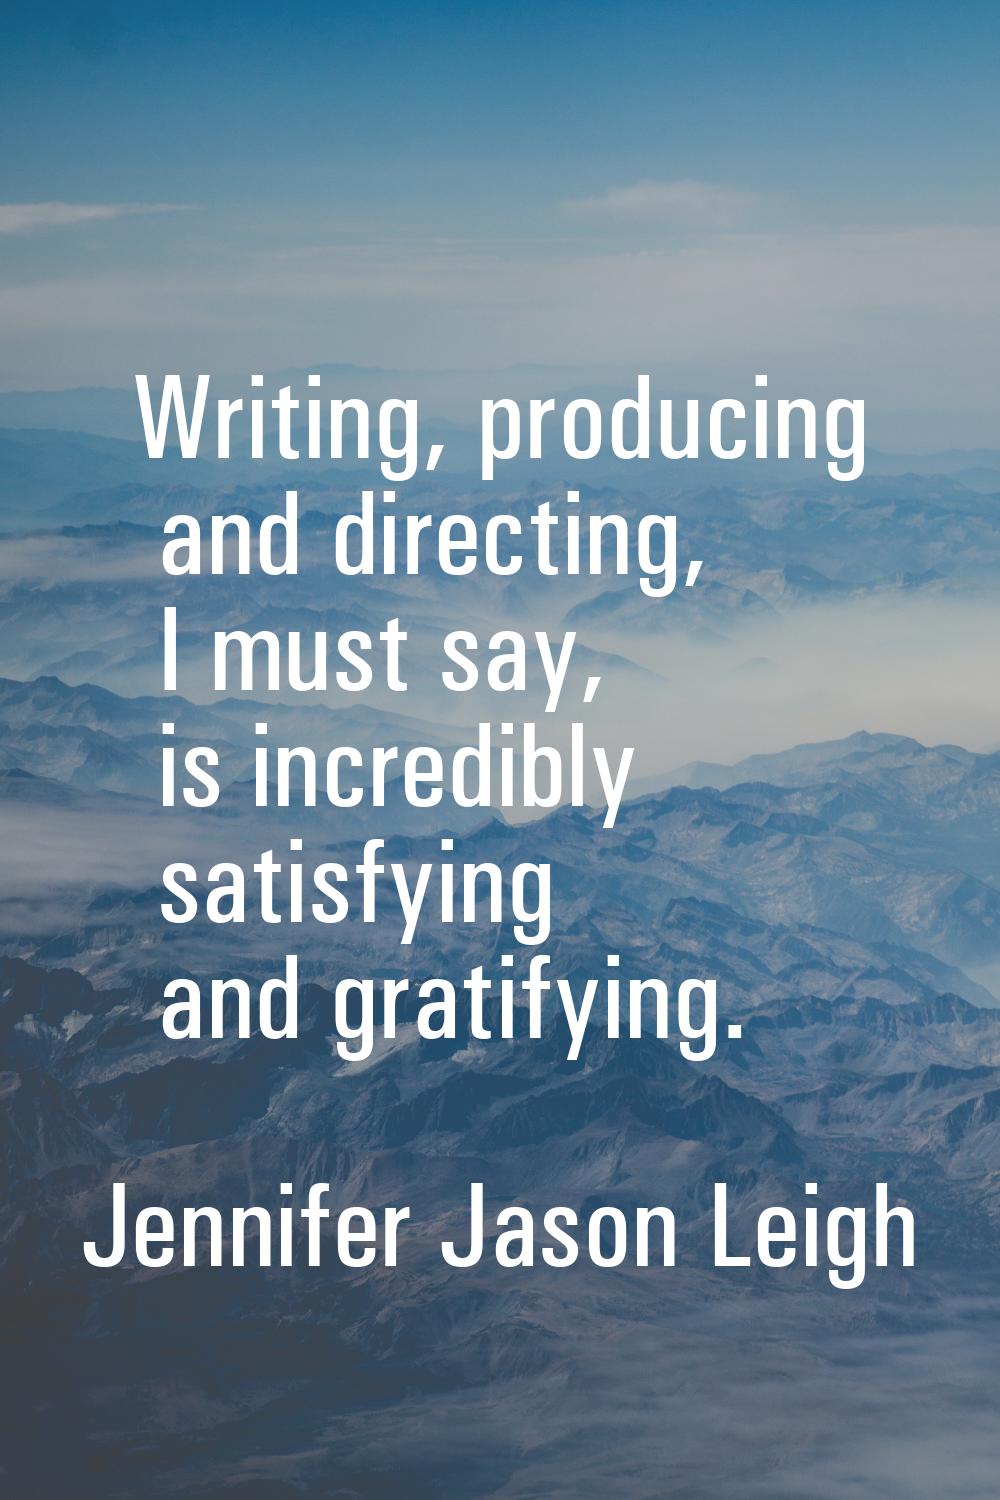 Writing, producing and directing, I must say, is incredibly satisfying and gratifying.